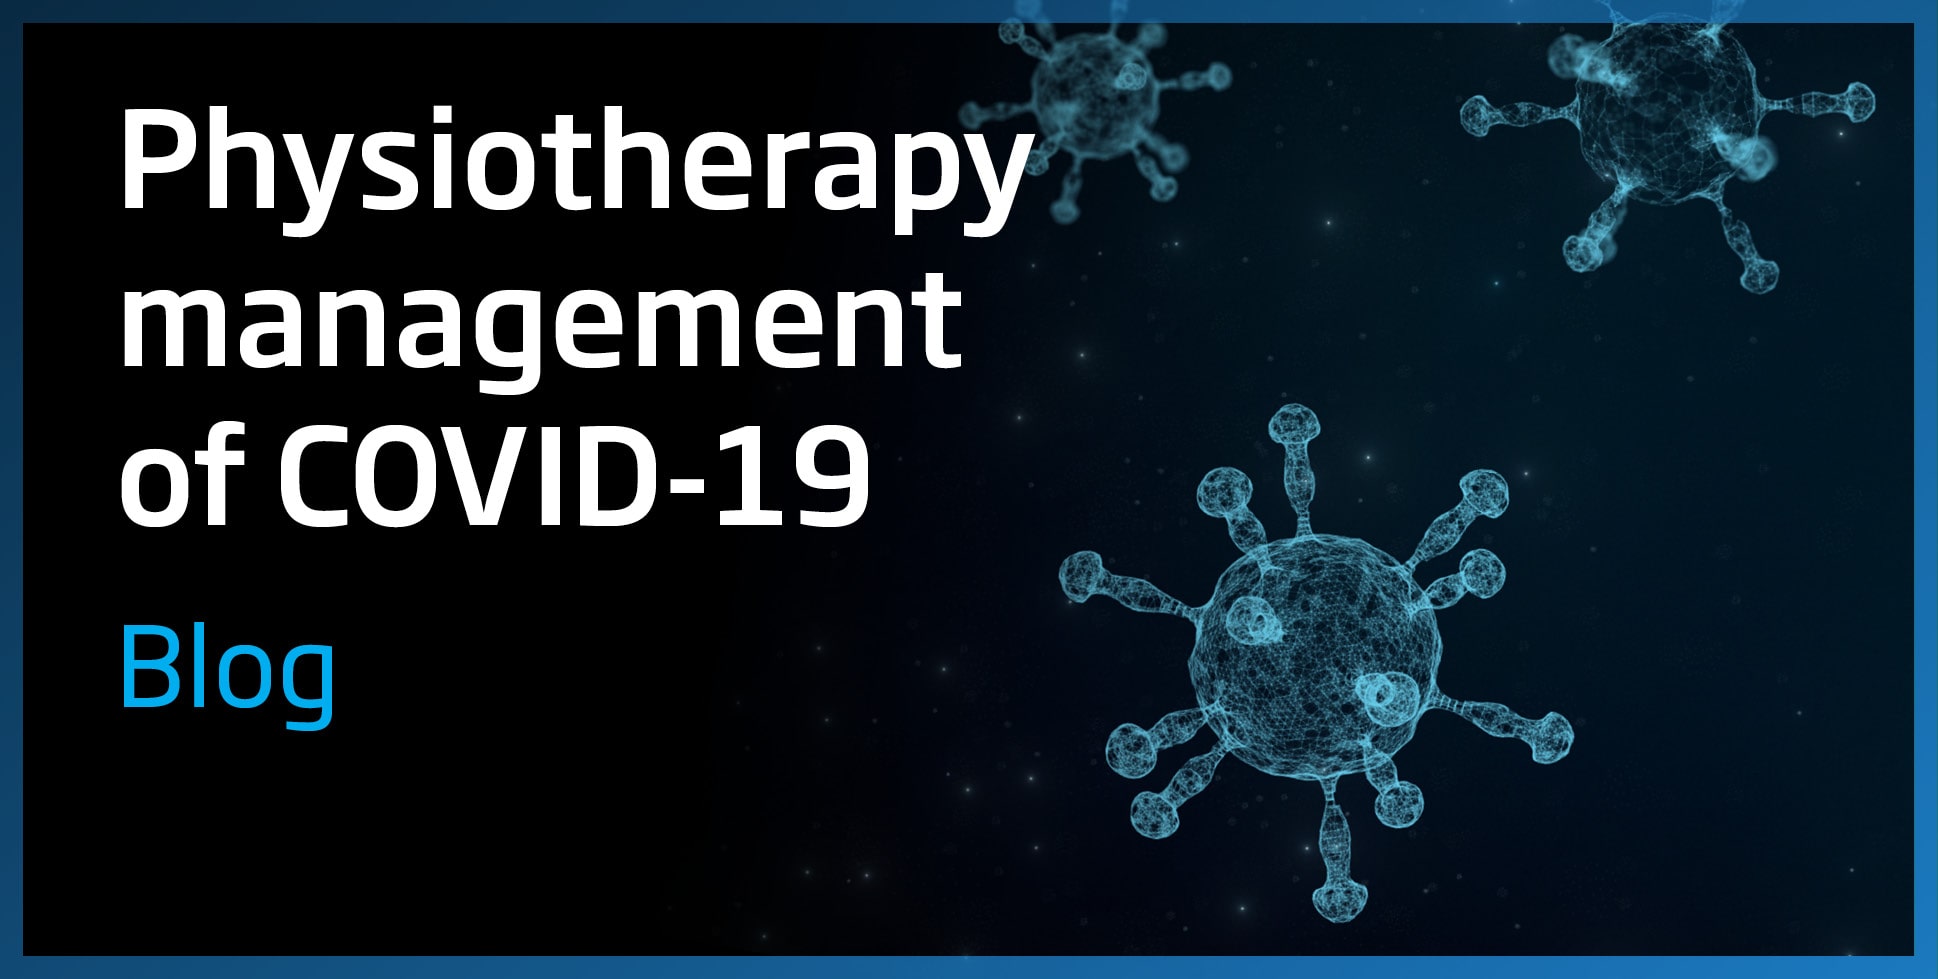 Physiotherapy management of COVID-19